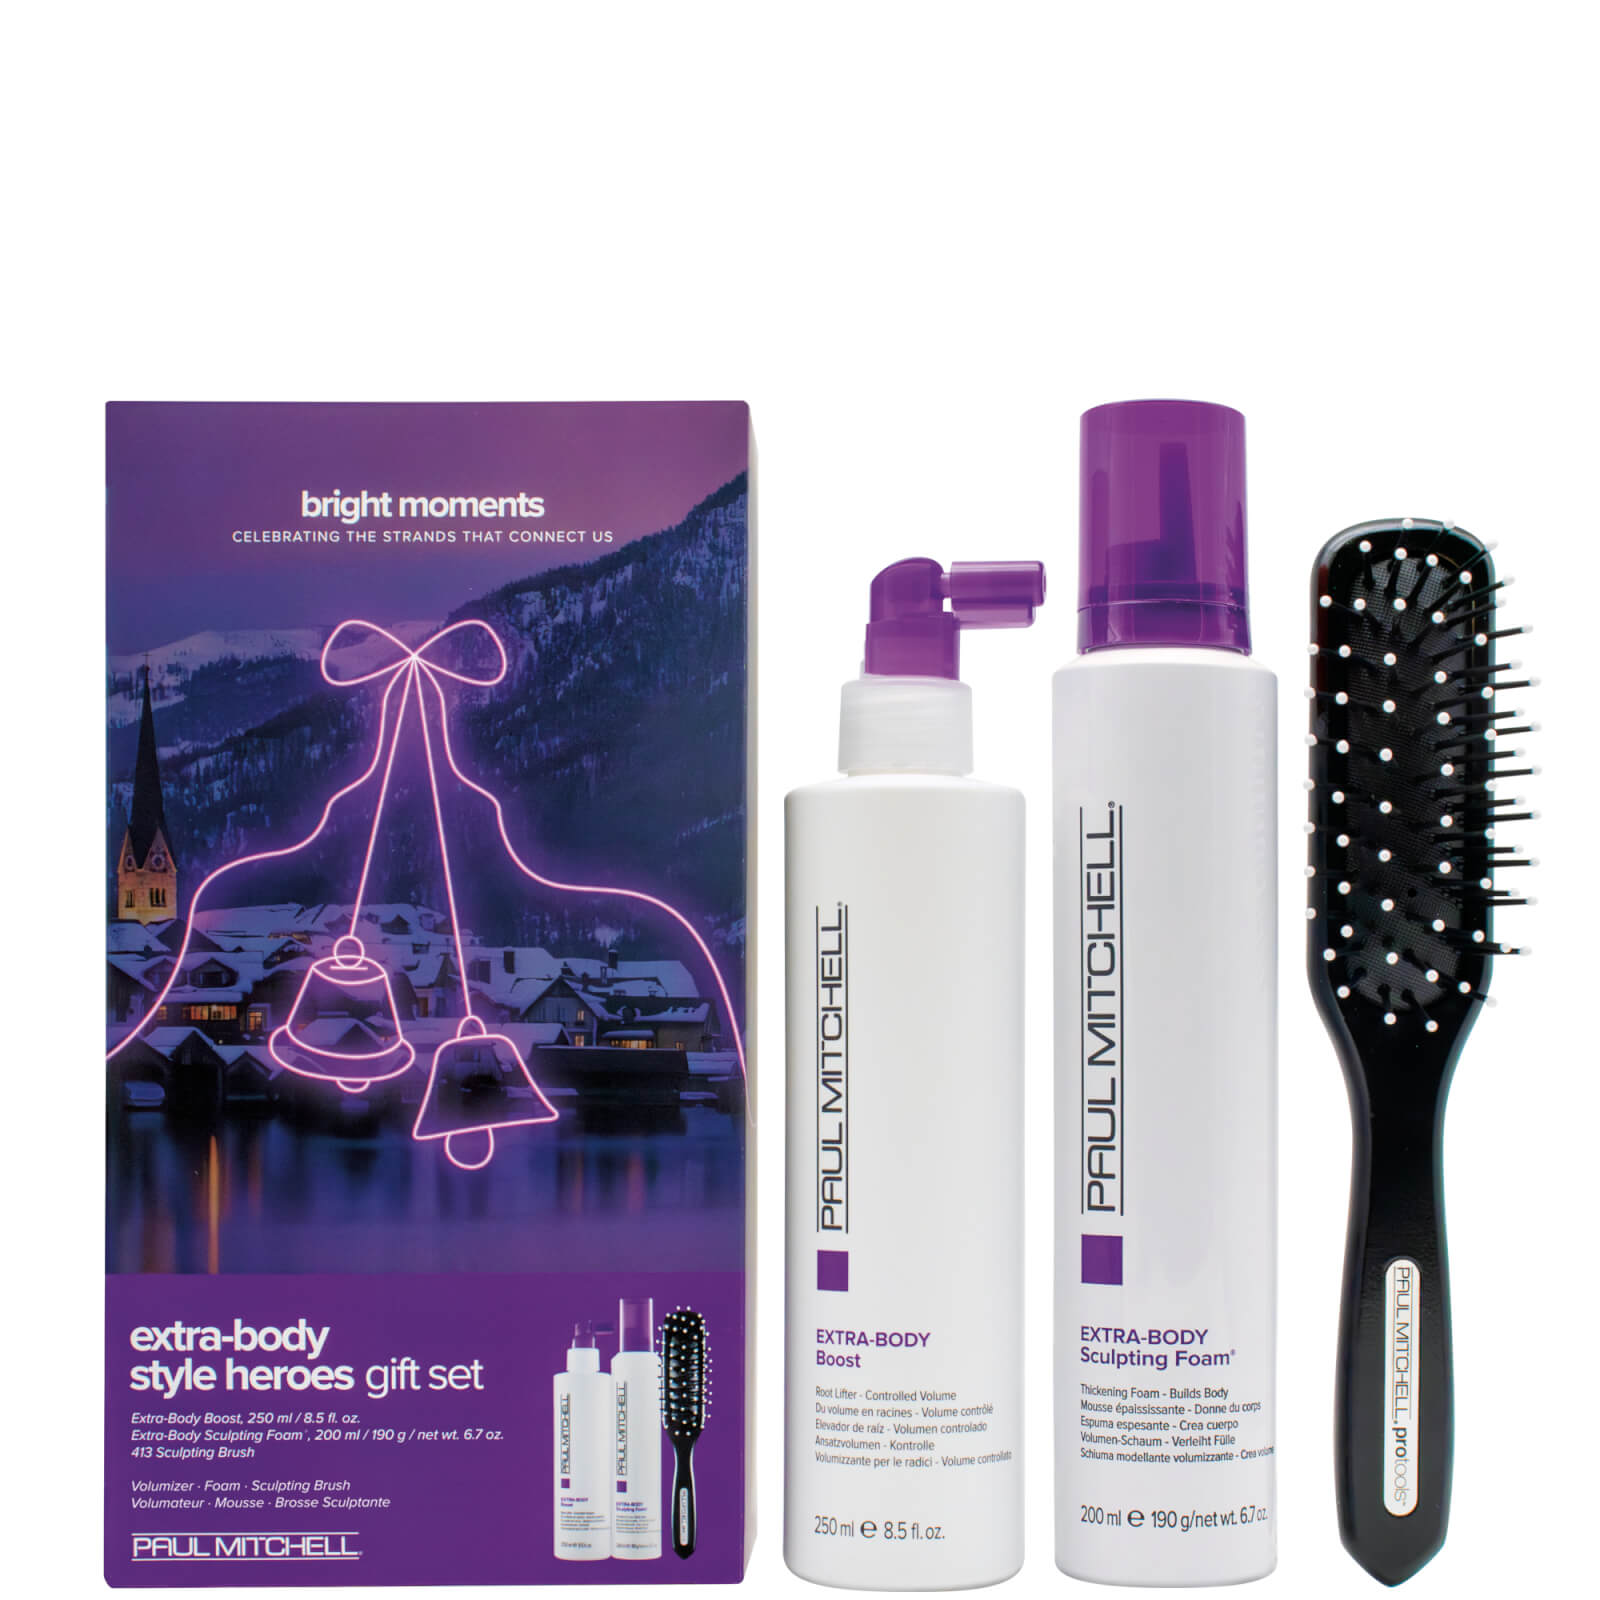 paul mitchell extra body style heroes gift set duo and brush (worth £53.79)